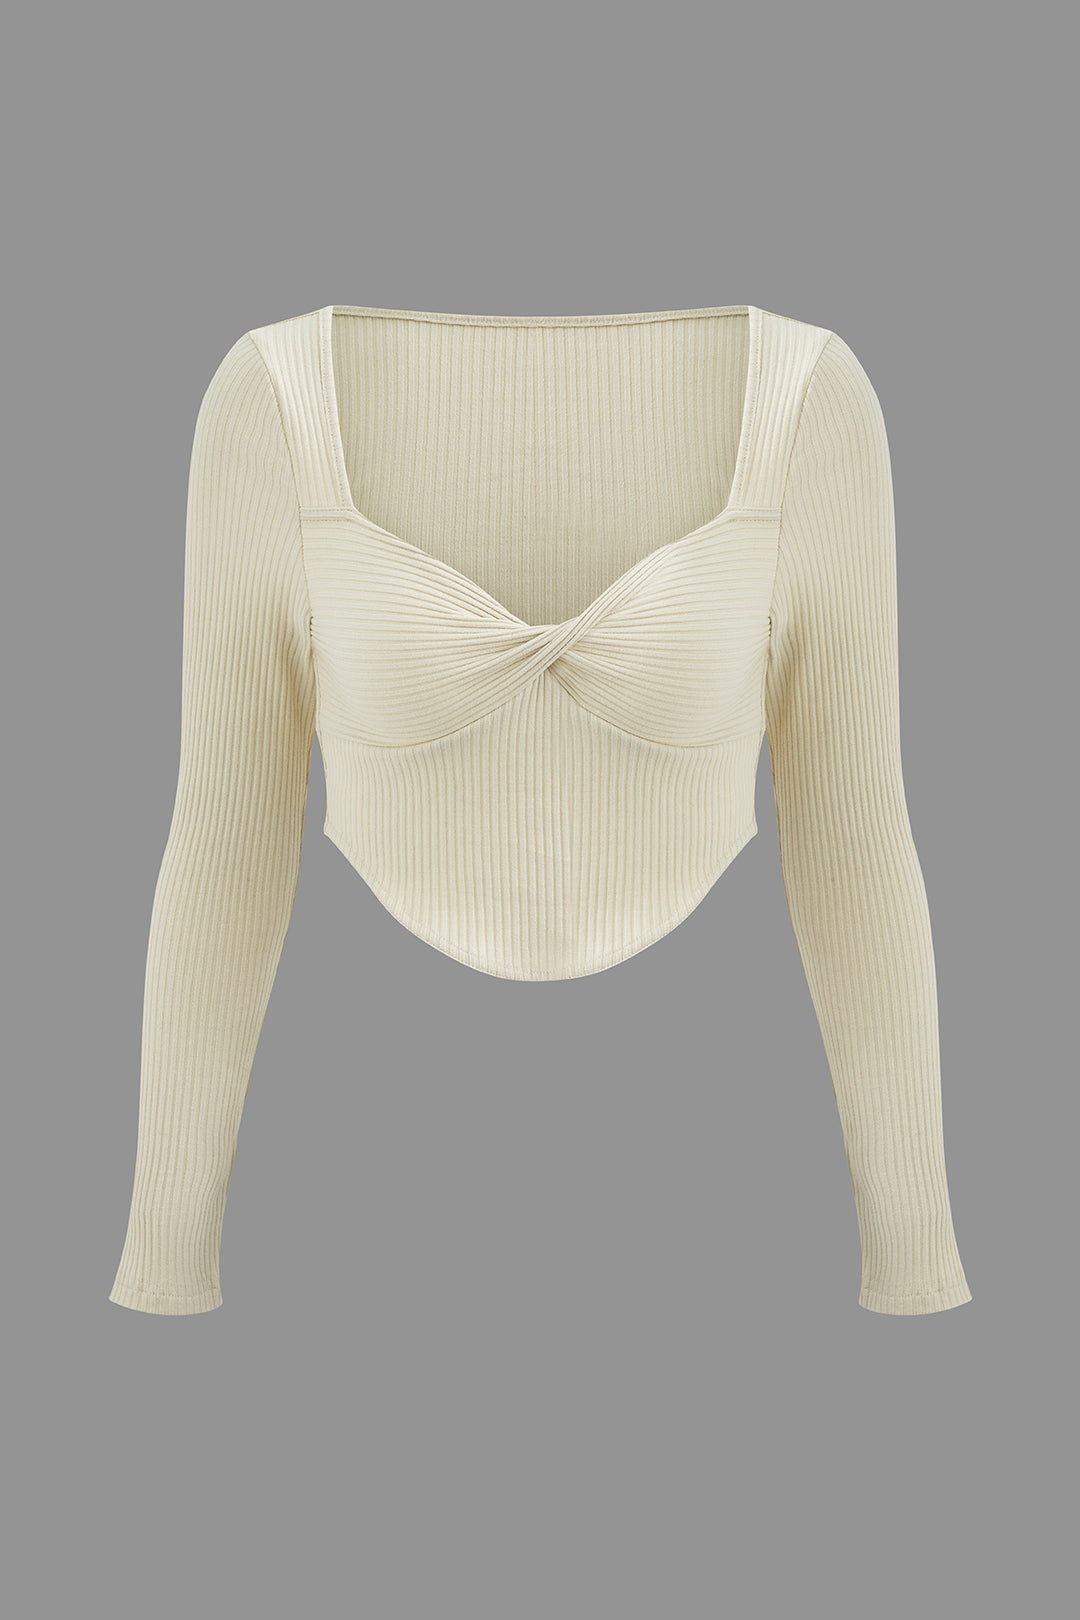 Square Neck Twist Front Crop Rib Knit Long Sleeve Top